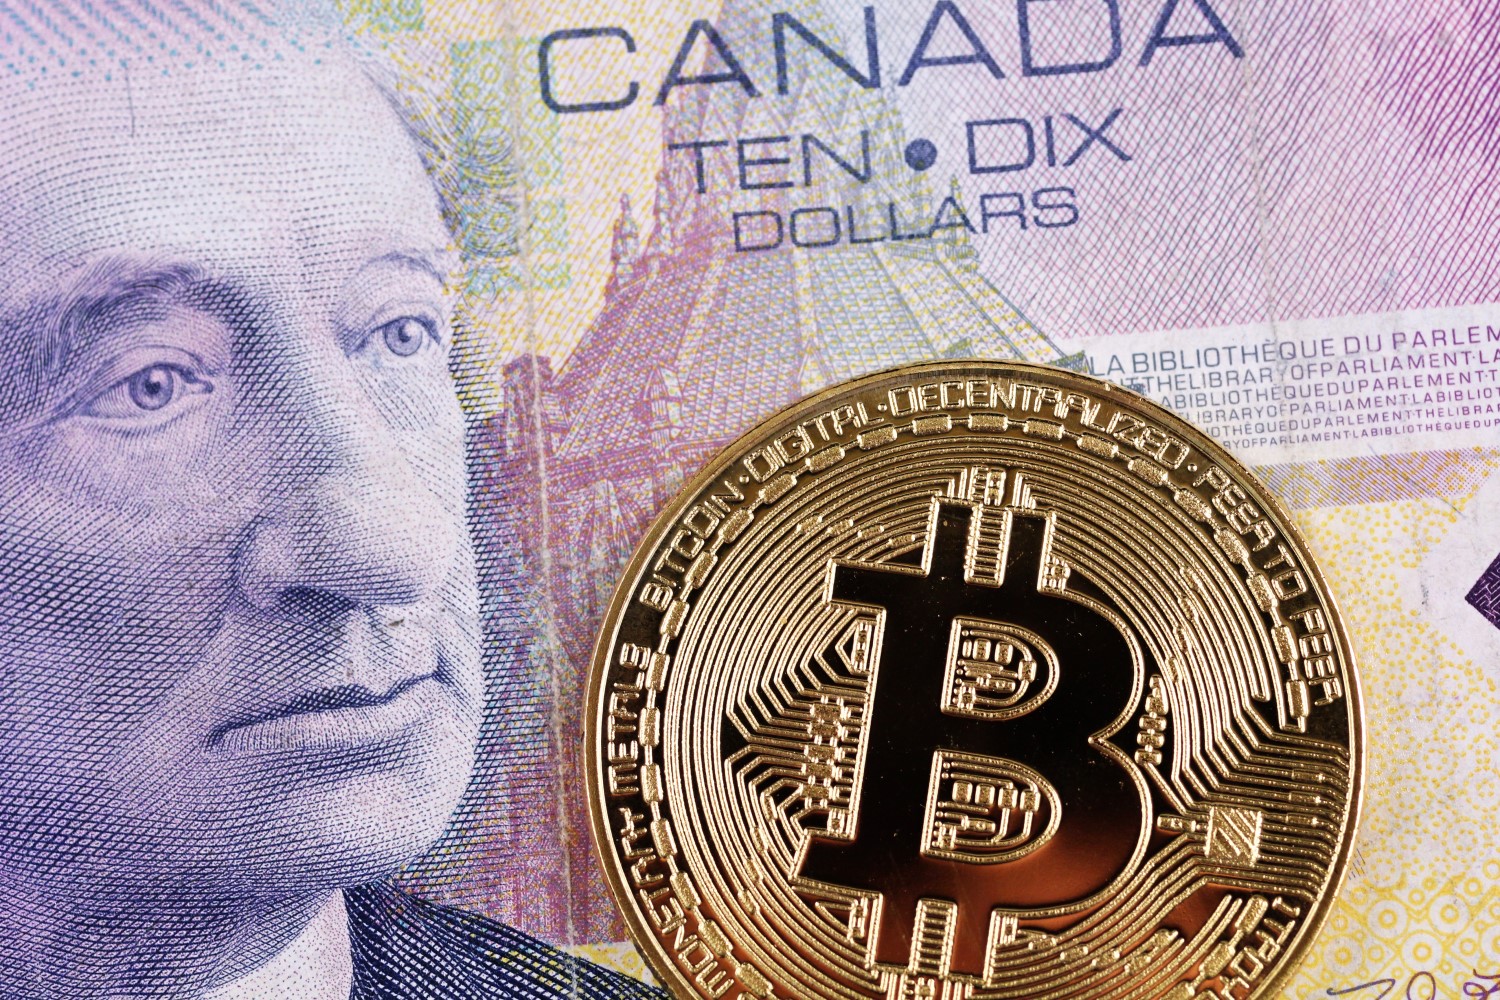 Canadian Municipality Set To Accept Bitcoin For Property Tax Payments